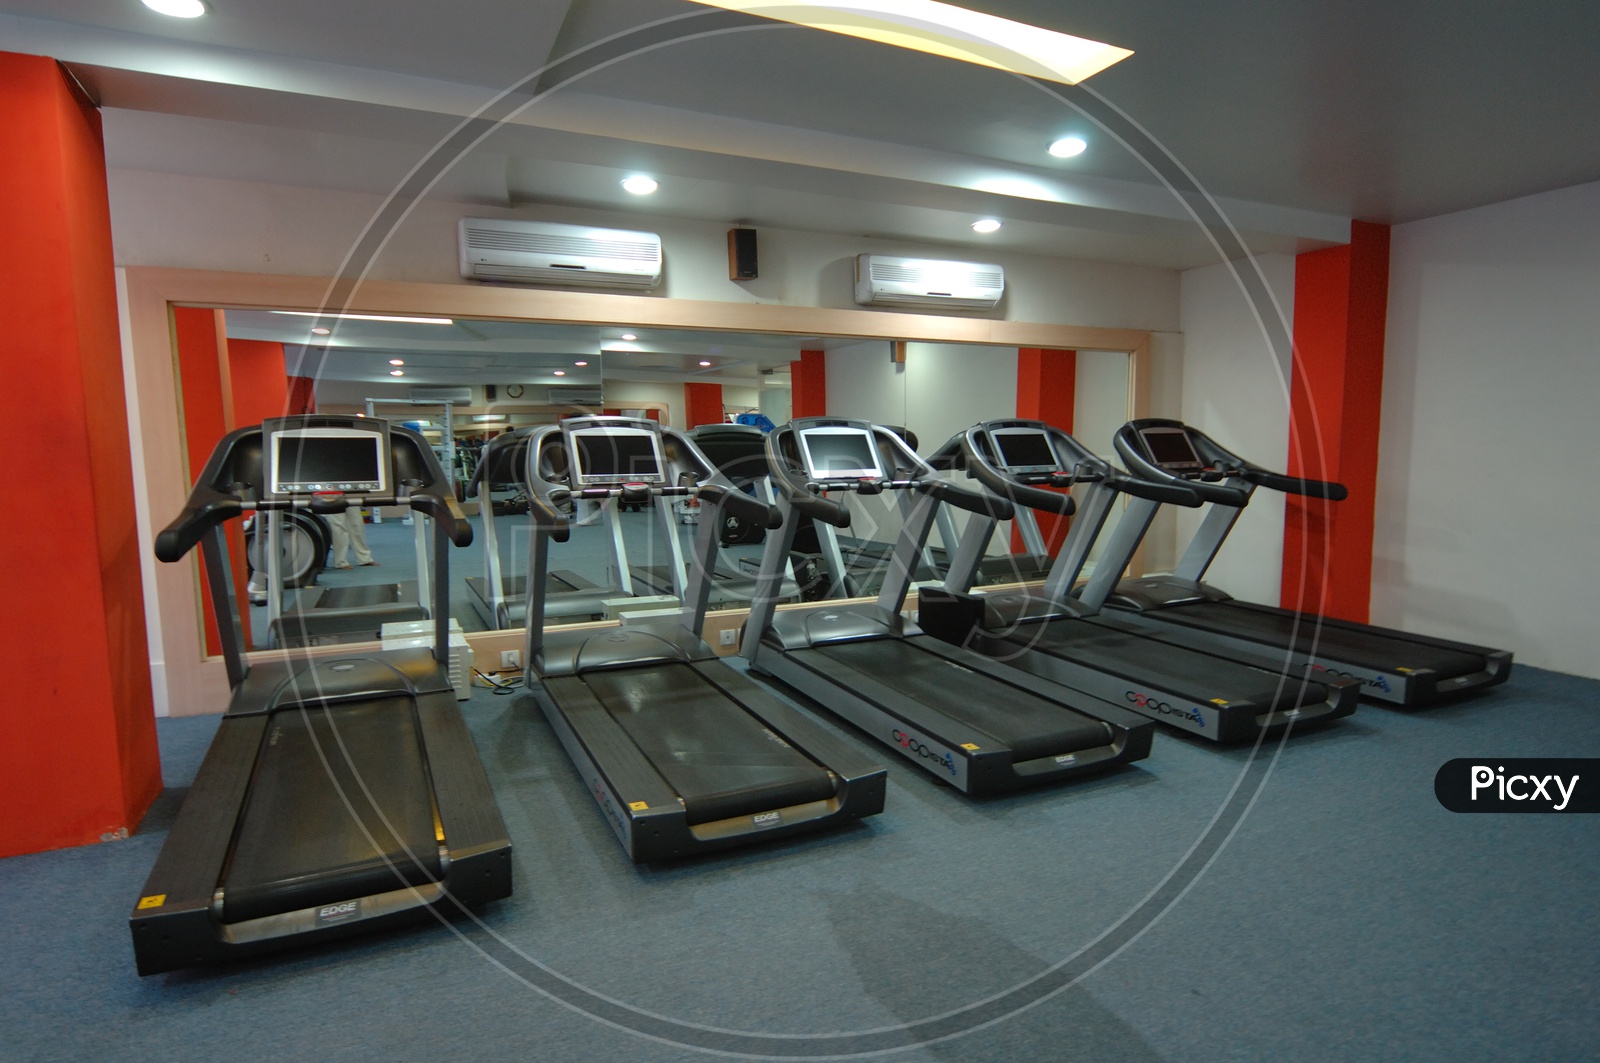 Fitness and strengthening equipment in the gym - Treadmills